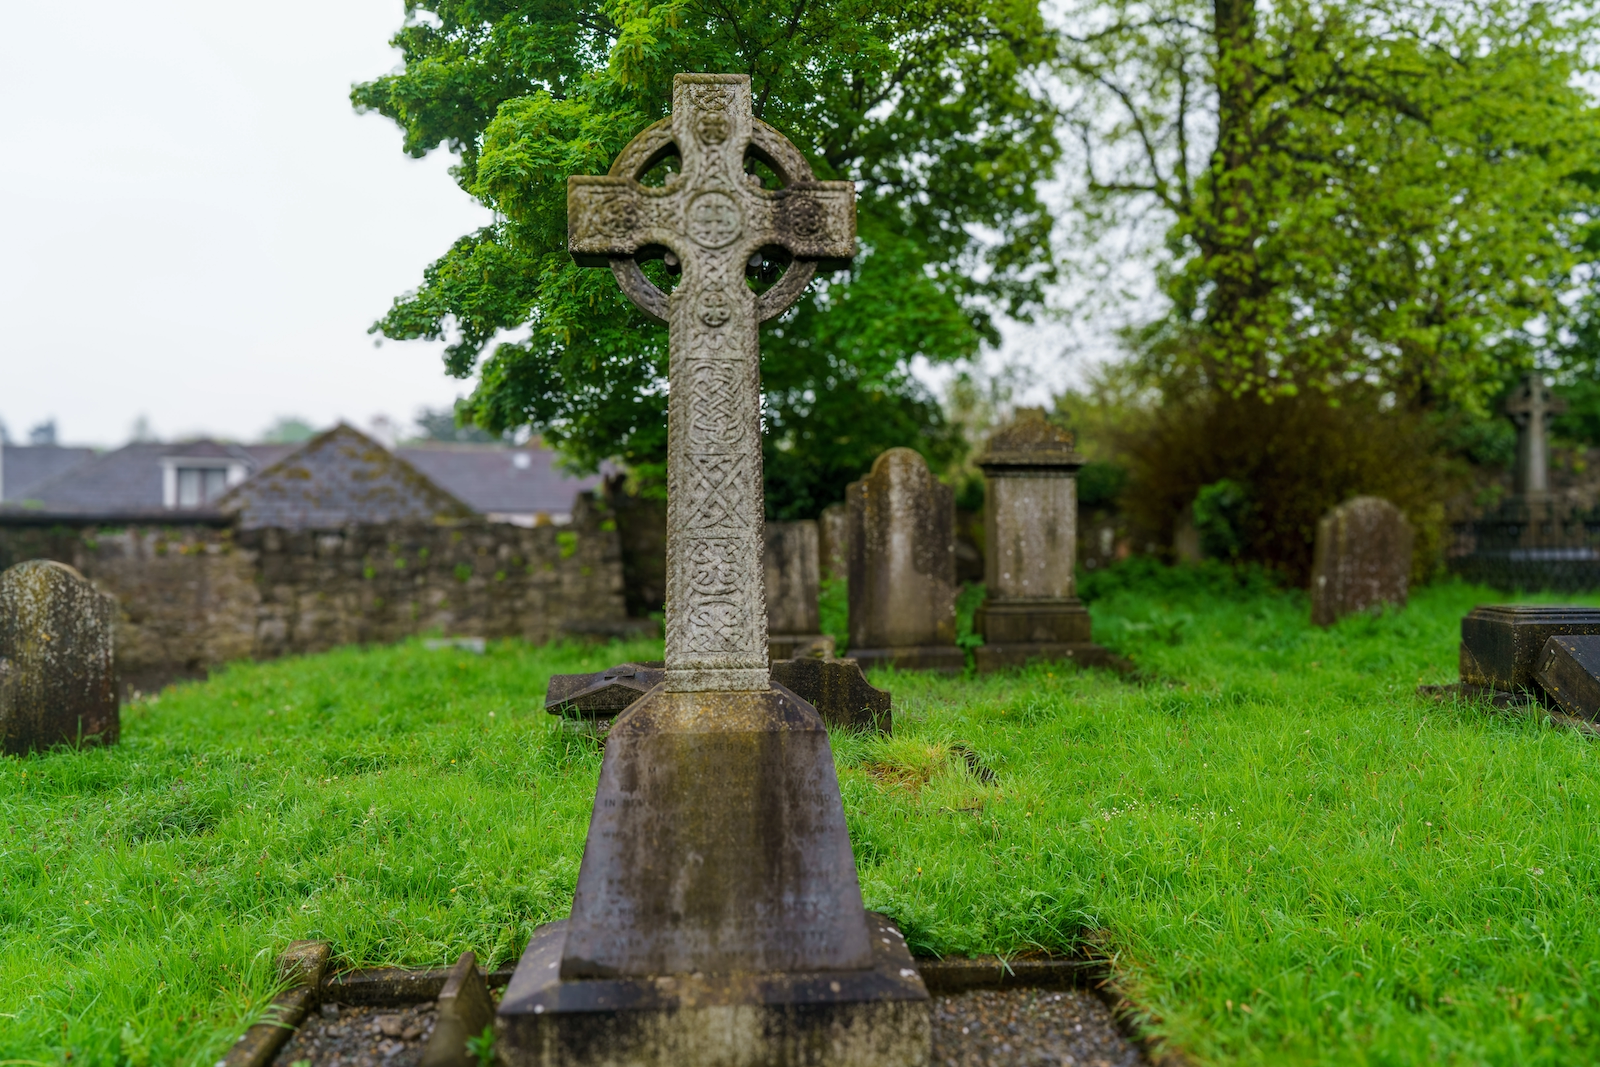 ST. JOHN’S GRAVEYARD IN KILKENNY [PHOTOGRAPHED DURING AN INTENSE RAIN STORM IN MAY 2016]-227179-024